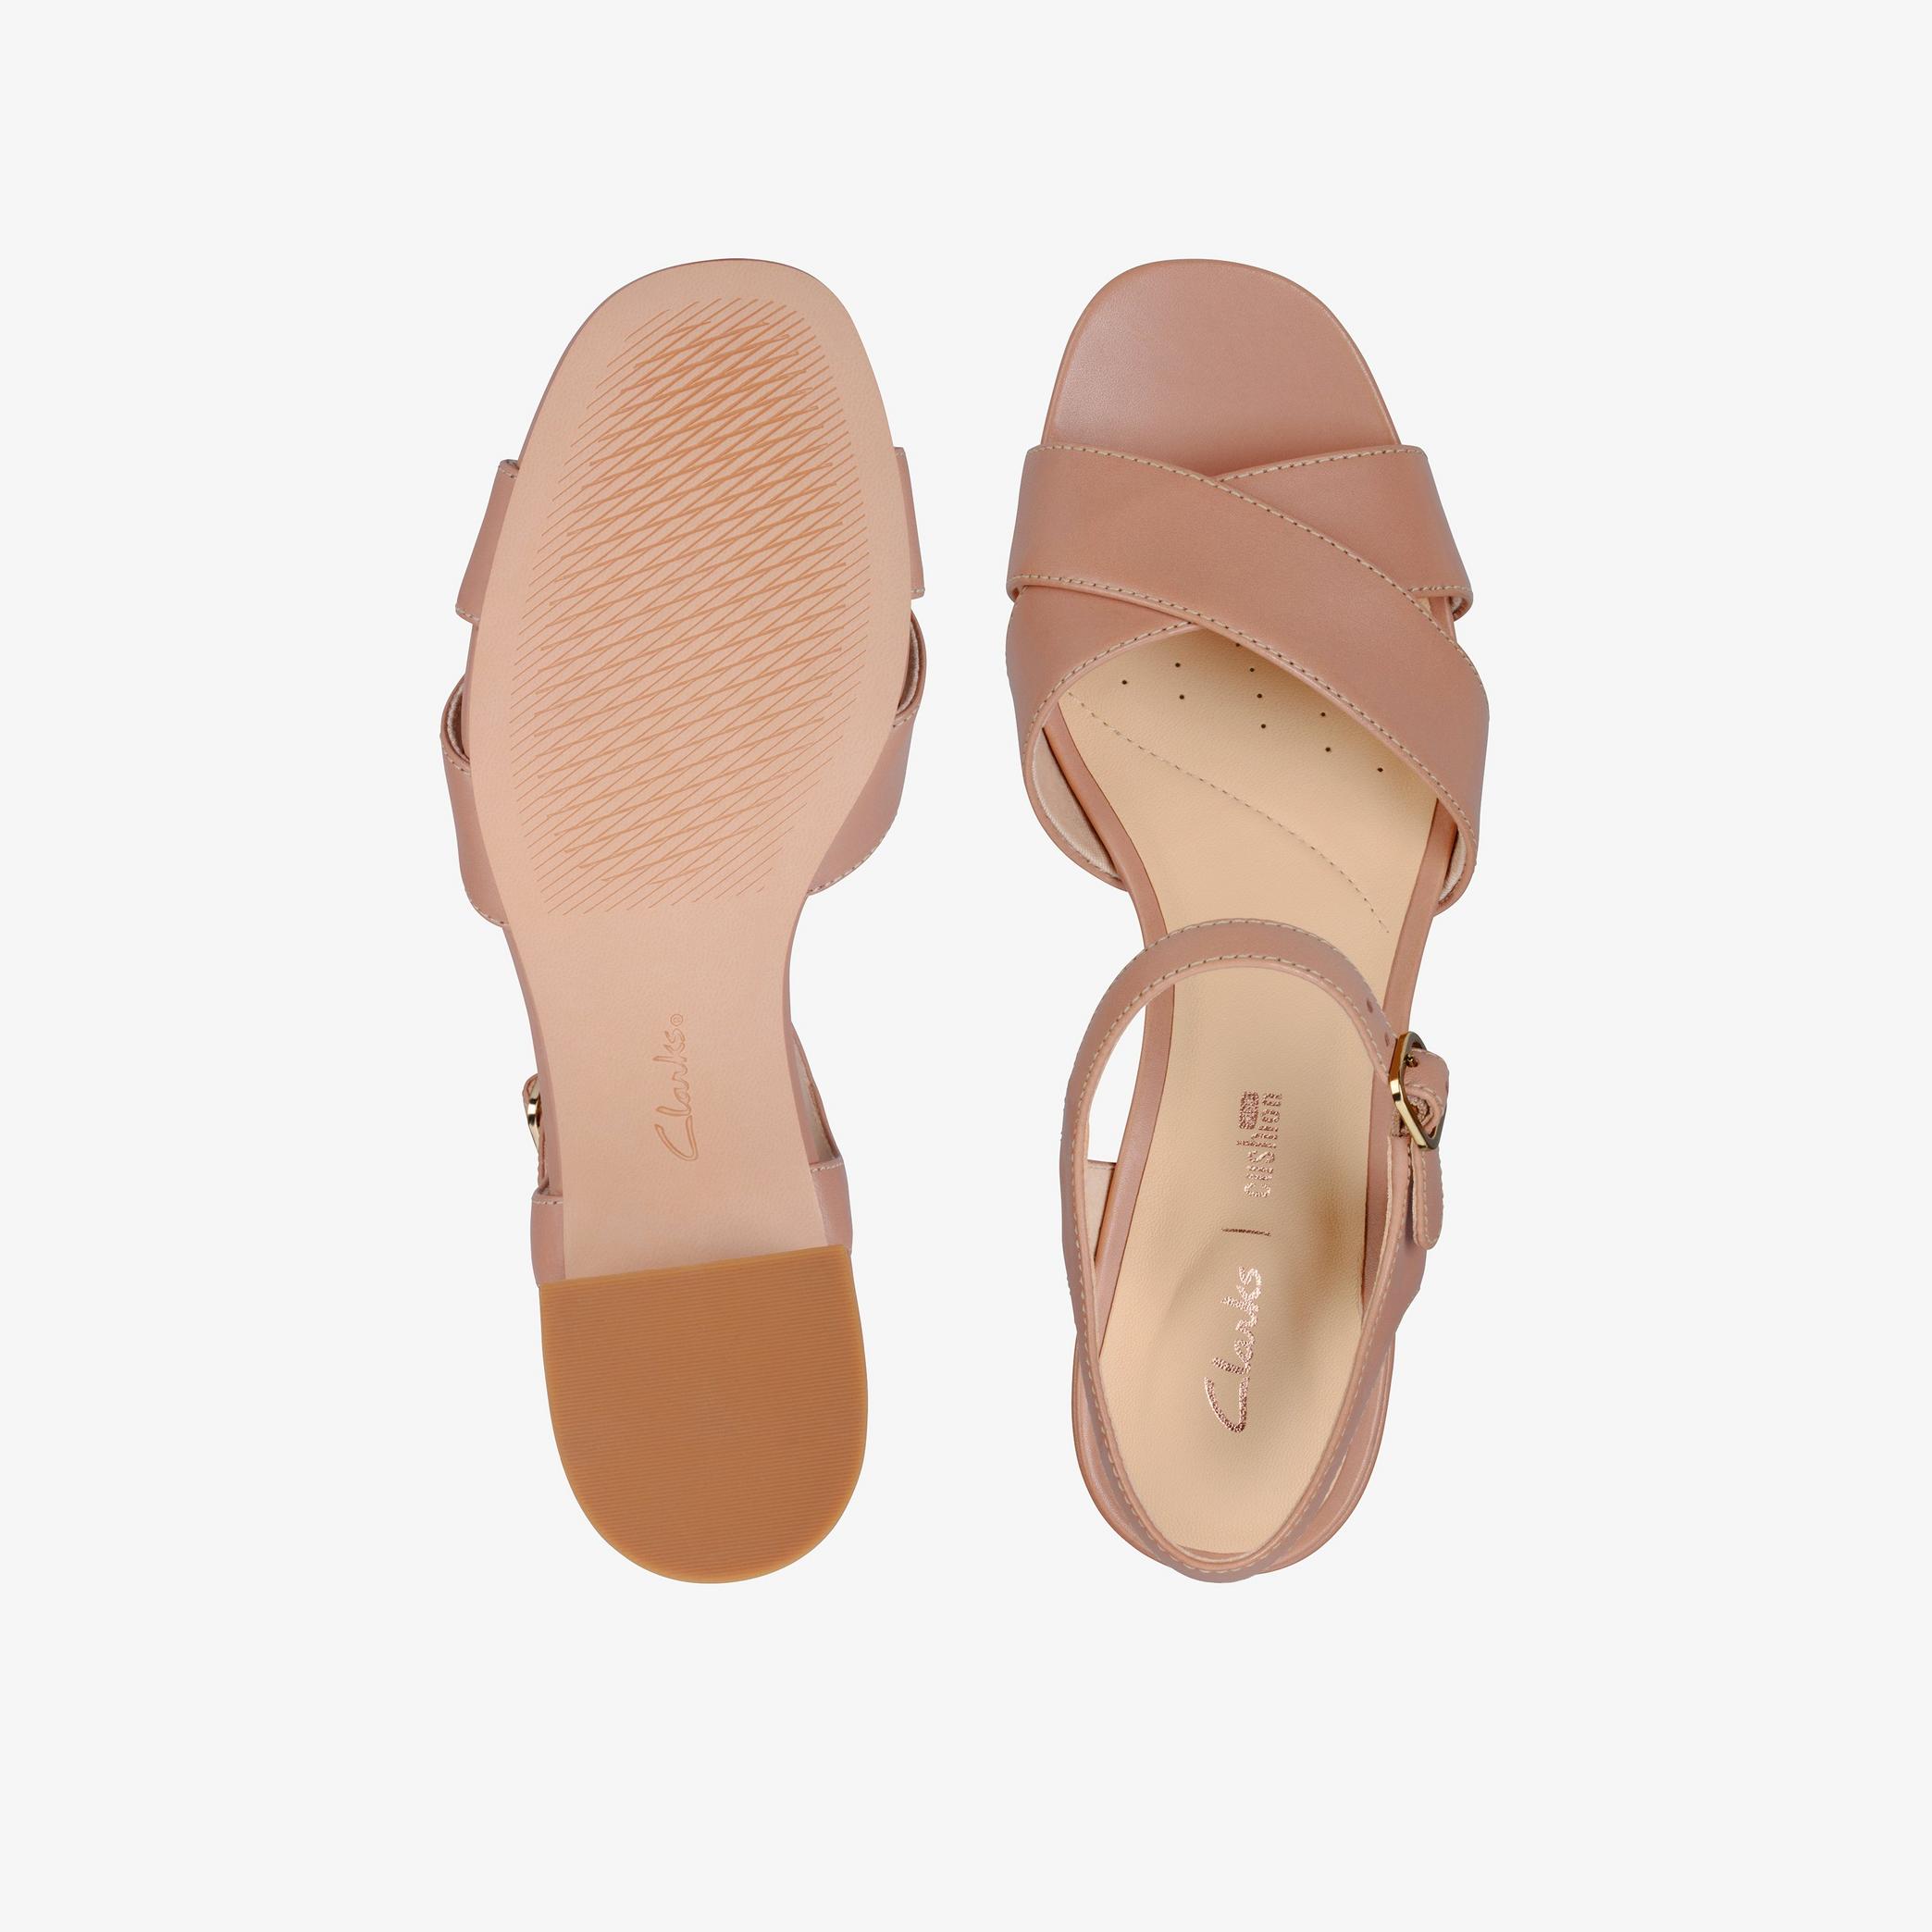 WOMENS Sheer35 Strap Praline Leather Strappy Sandals | Clarks Outlet